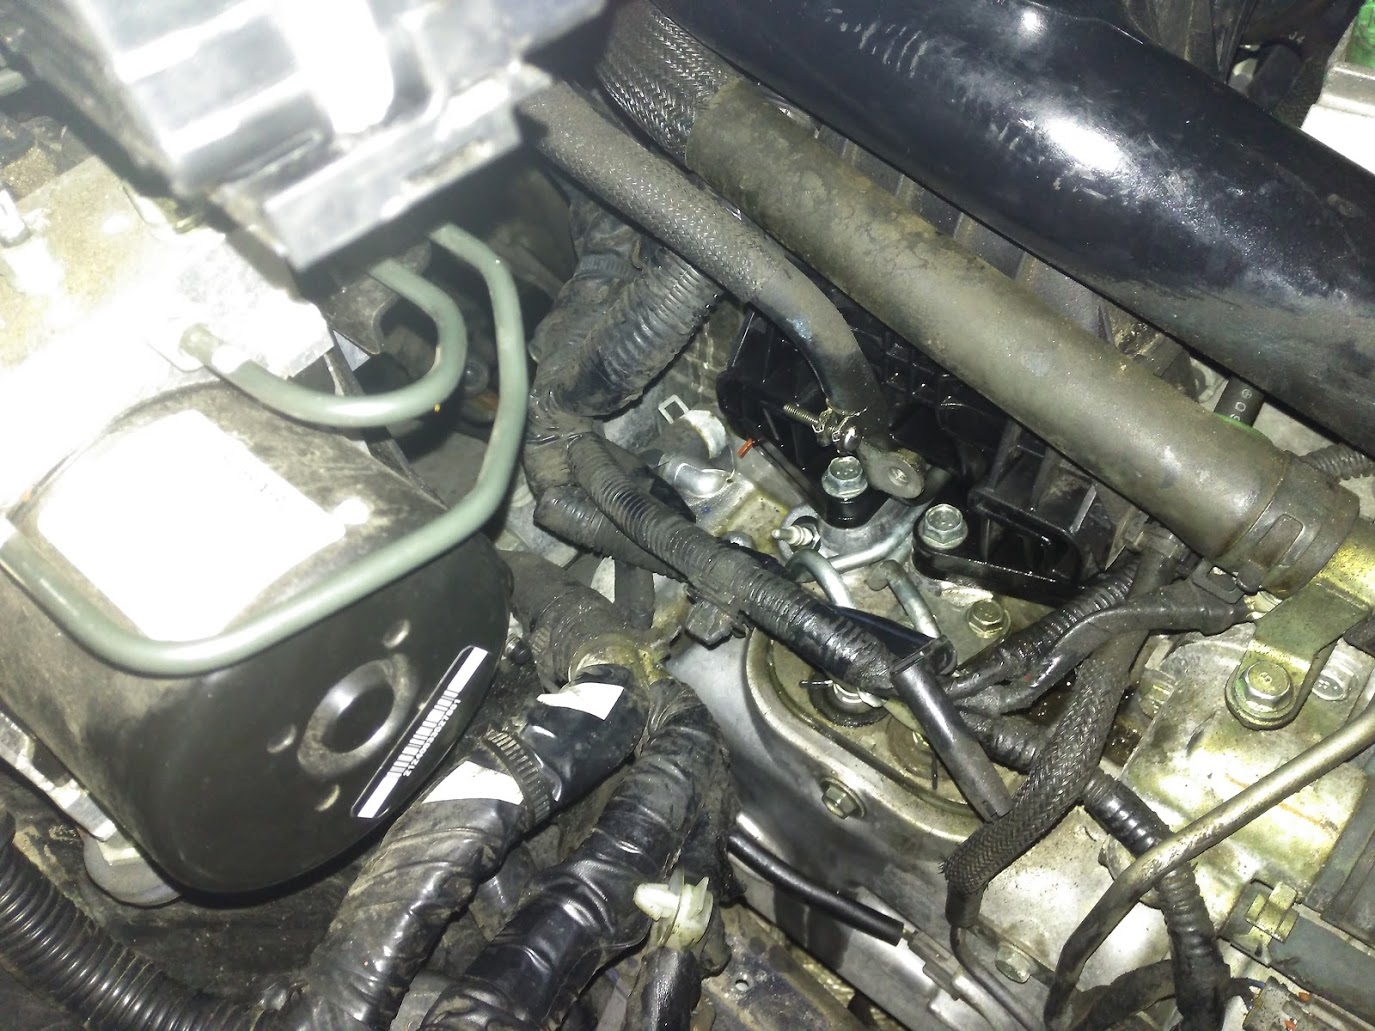 Diesel Outback Glow Plug Issue/Removal Subaru Outback